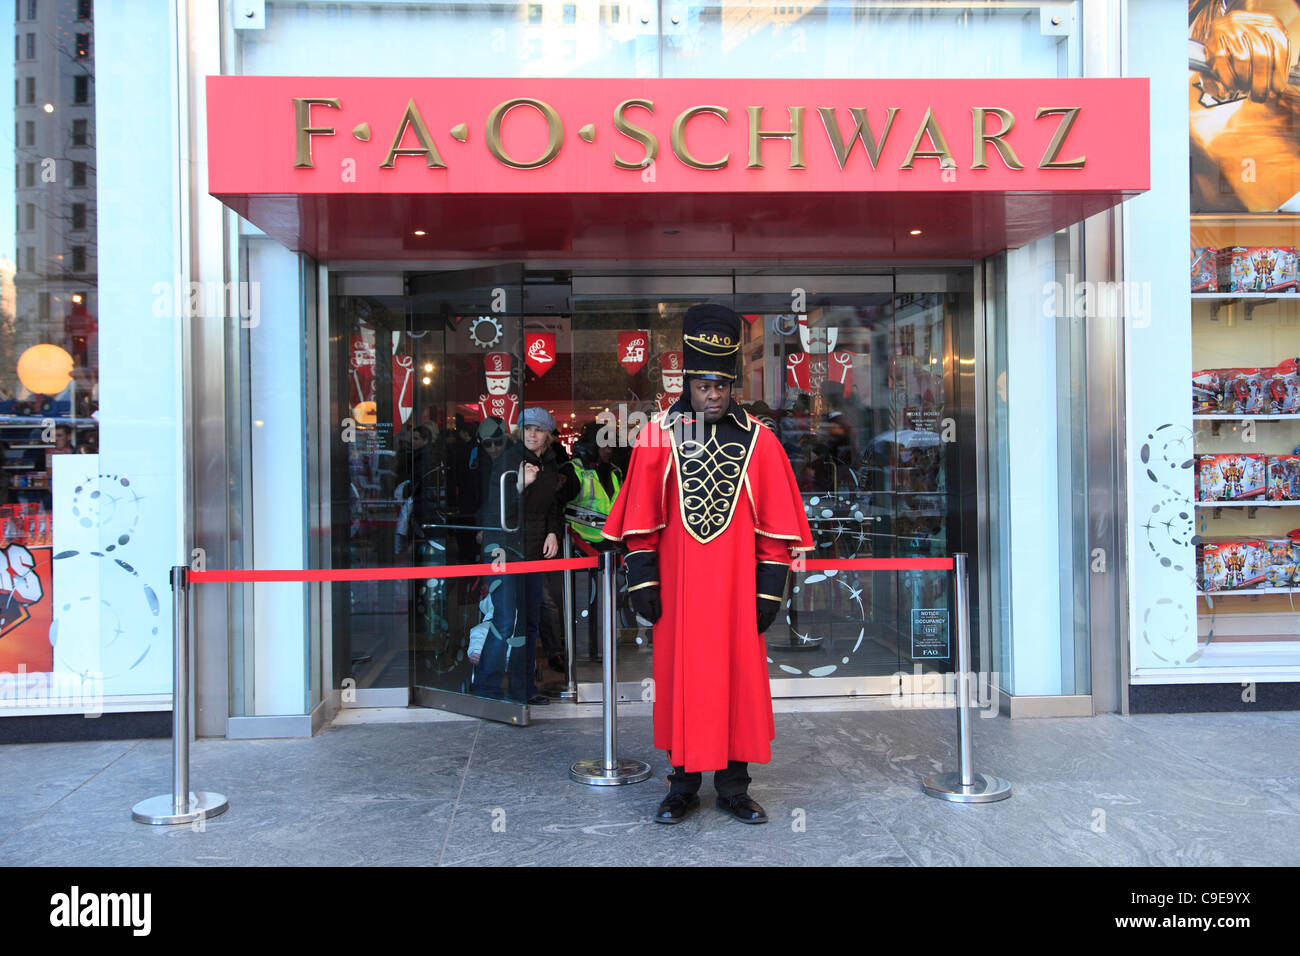 NYC's Iconic FAO Schwarz Toy Store Is Turning Into an Airbnb for